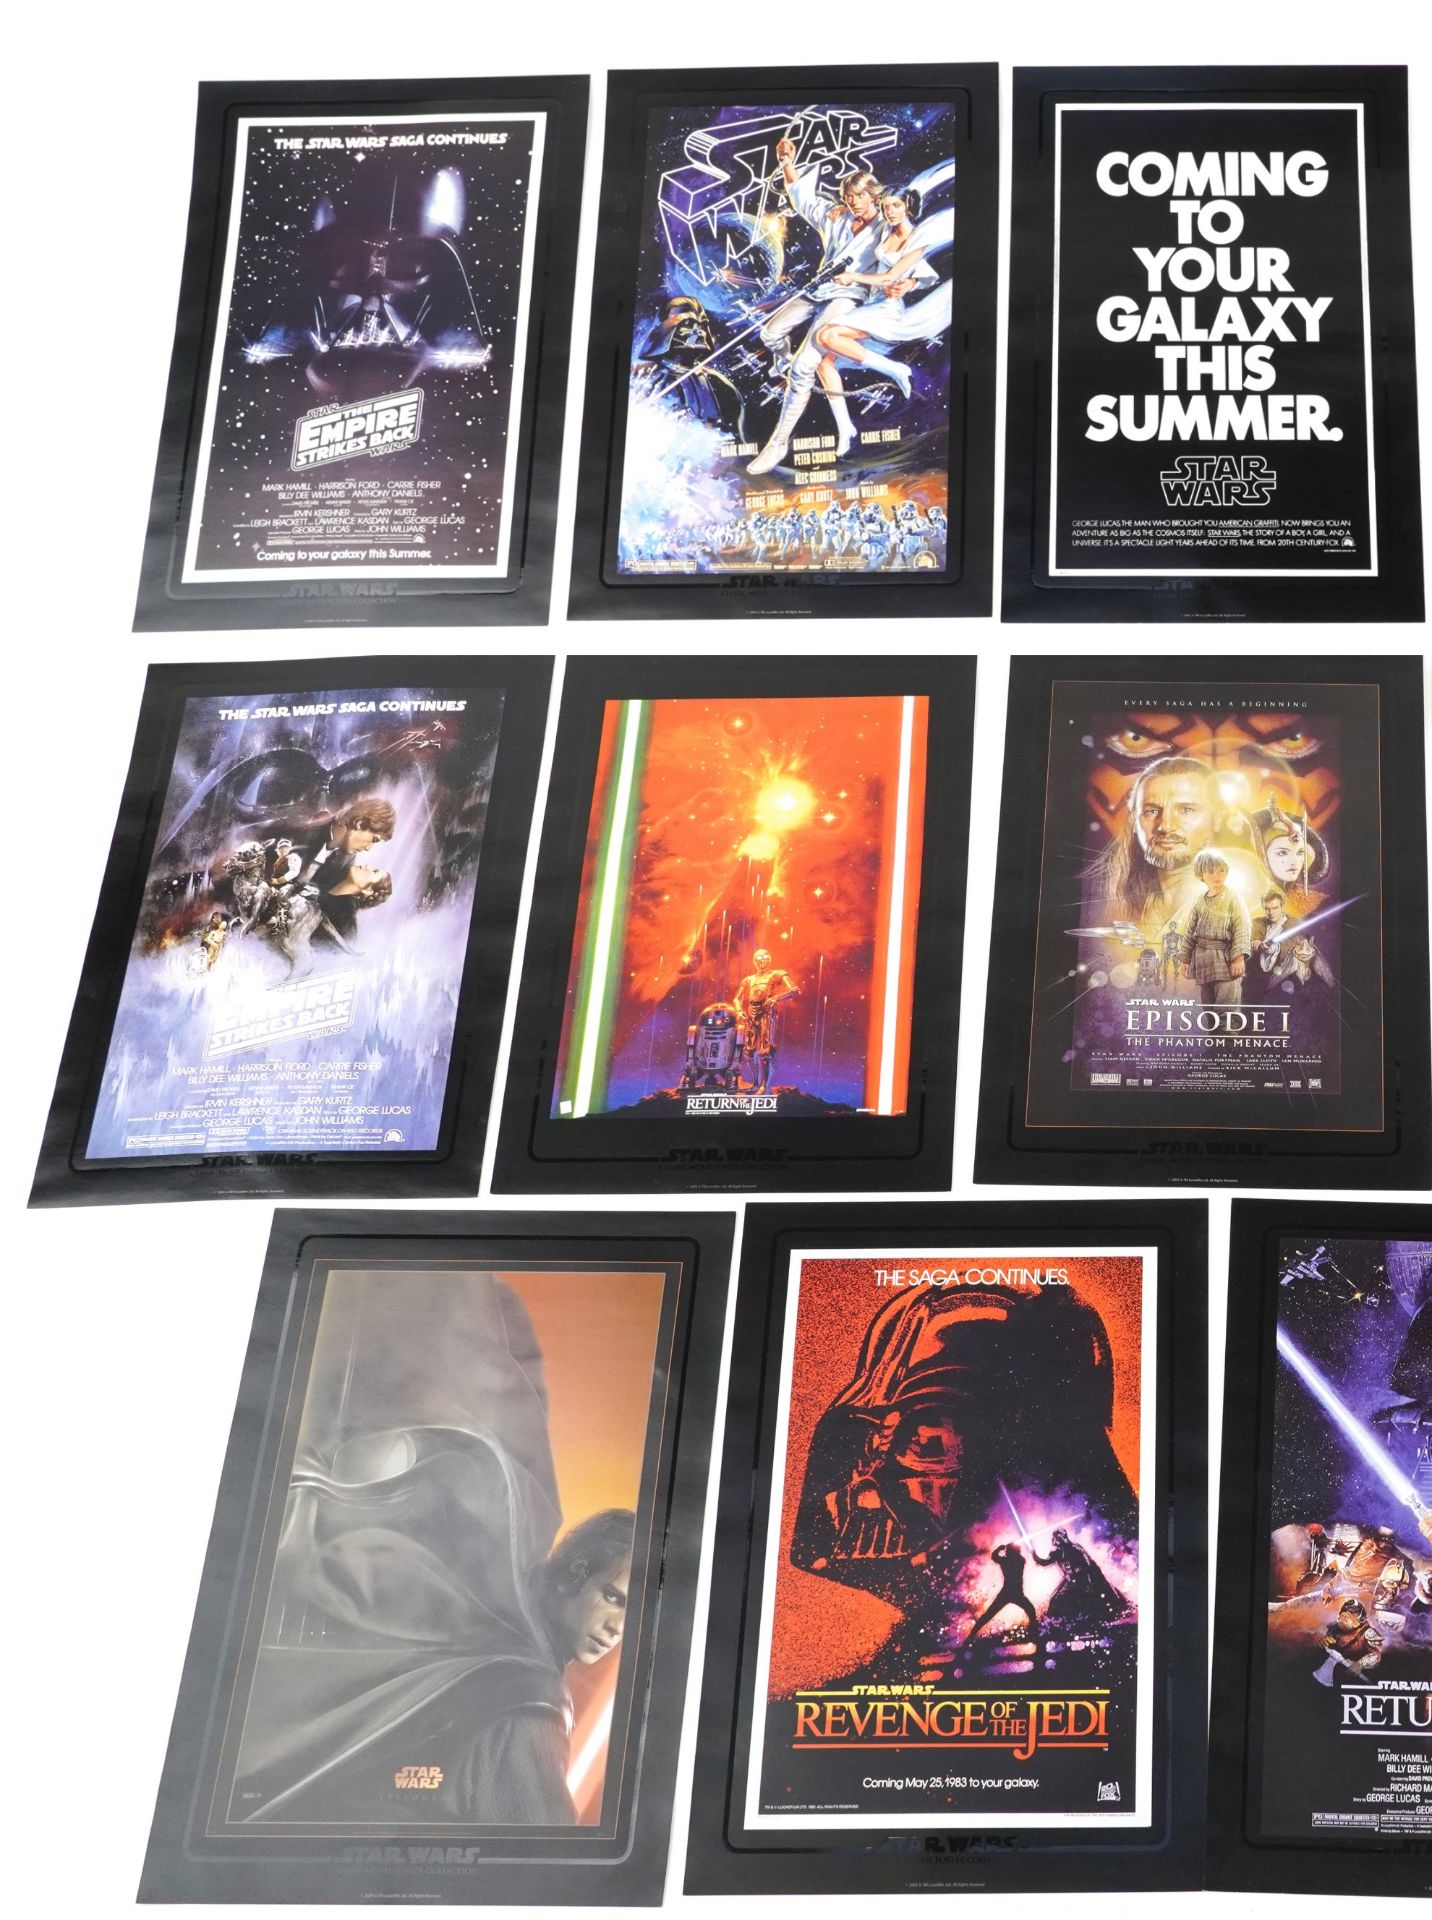 Star Wars ephemera including classic movie poster collection, Revenge of the Sith morphing - Image 2 of 4